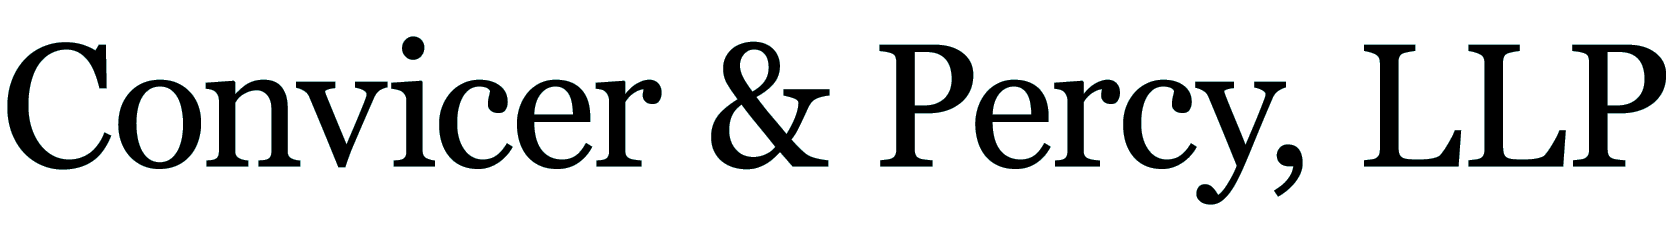 Convicer & Percy, LLP